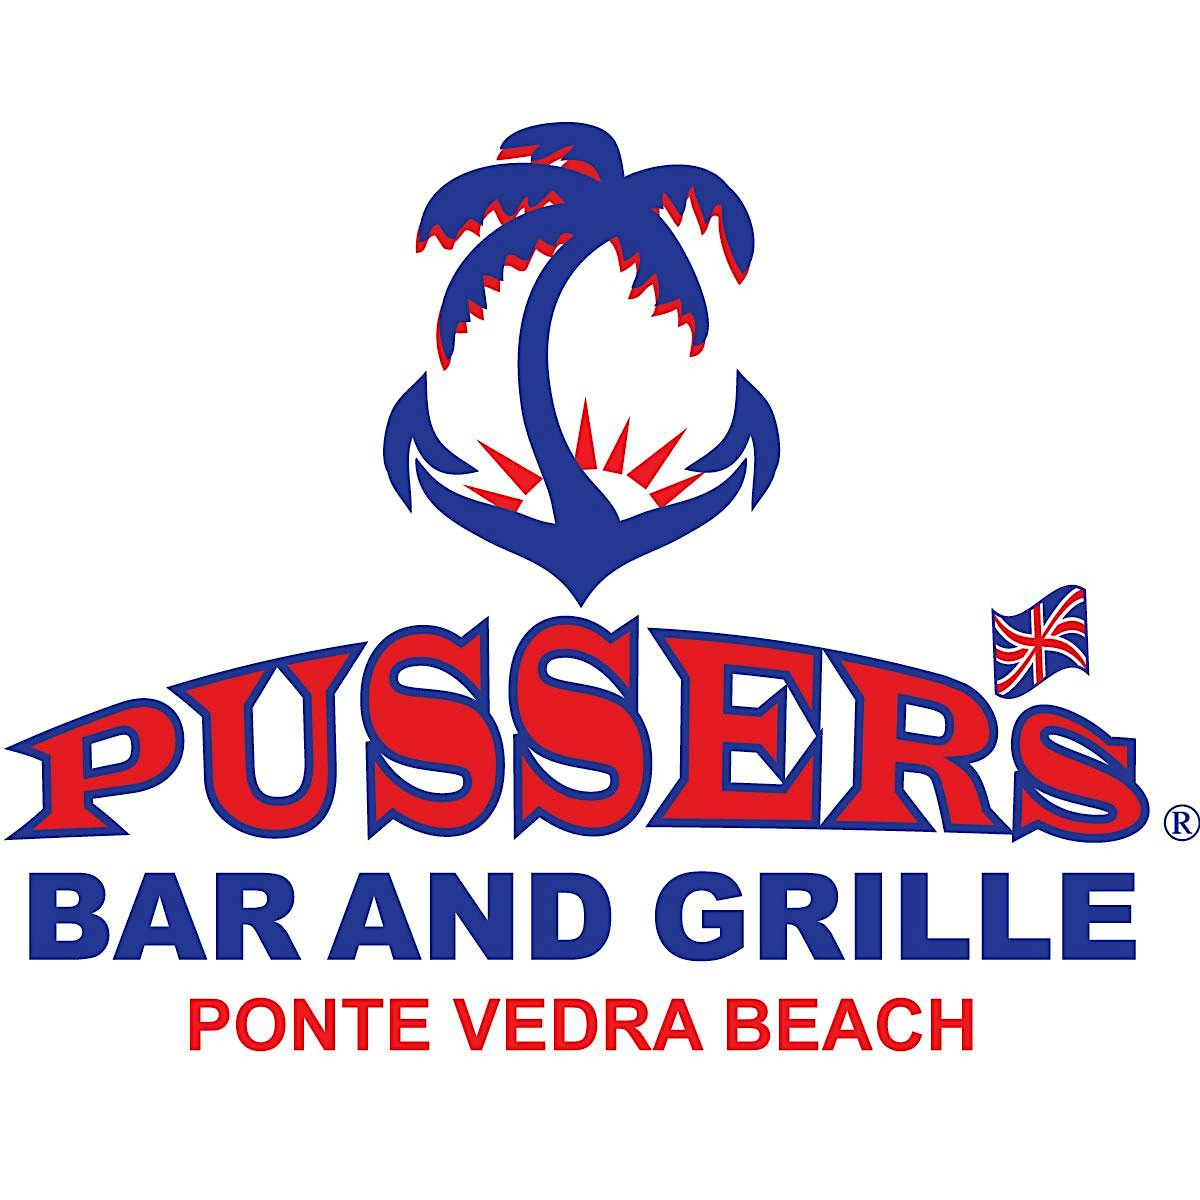 Pusser's Bar & Grille